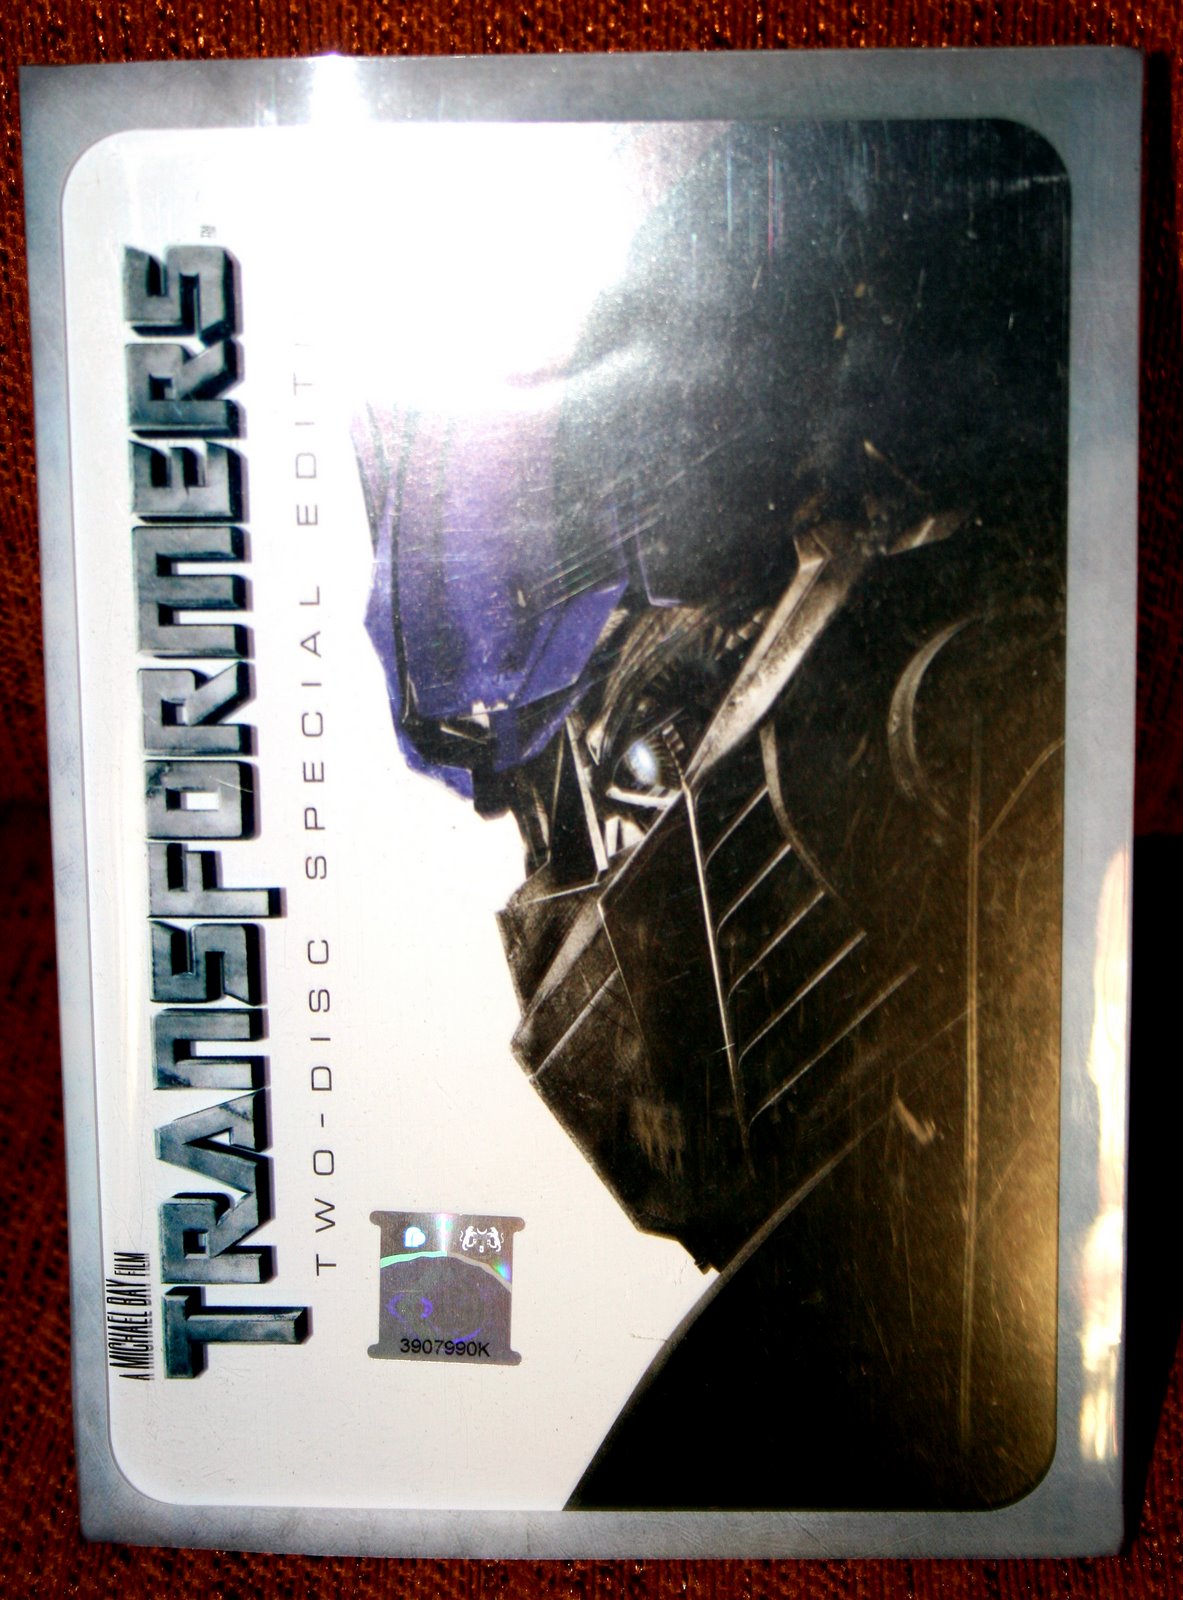 [Transformers+Two+Disc+Special+Edition.jpg]